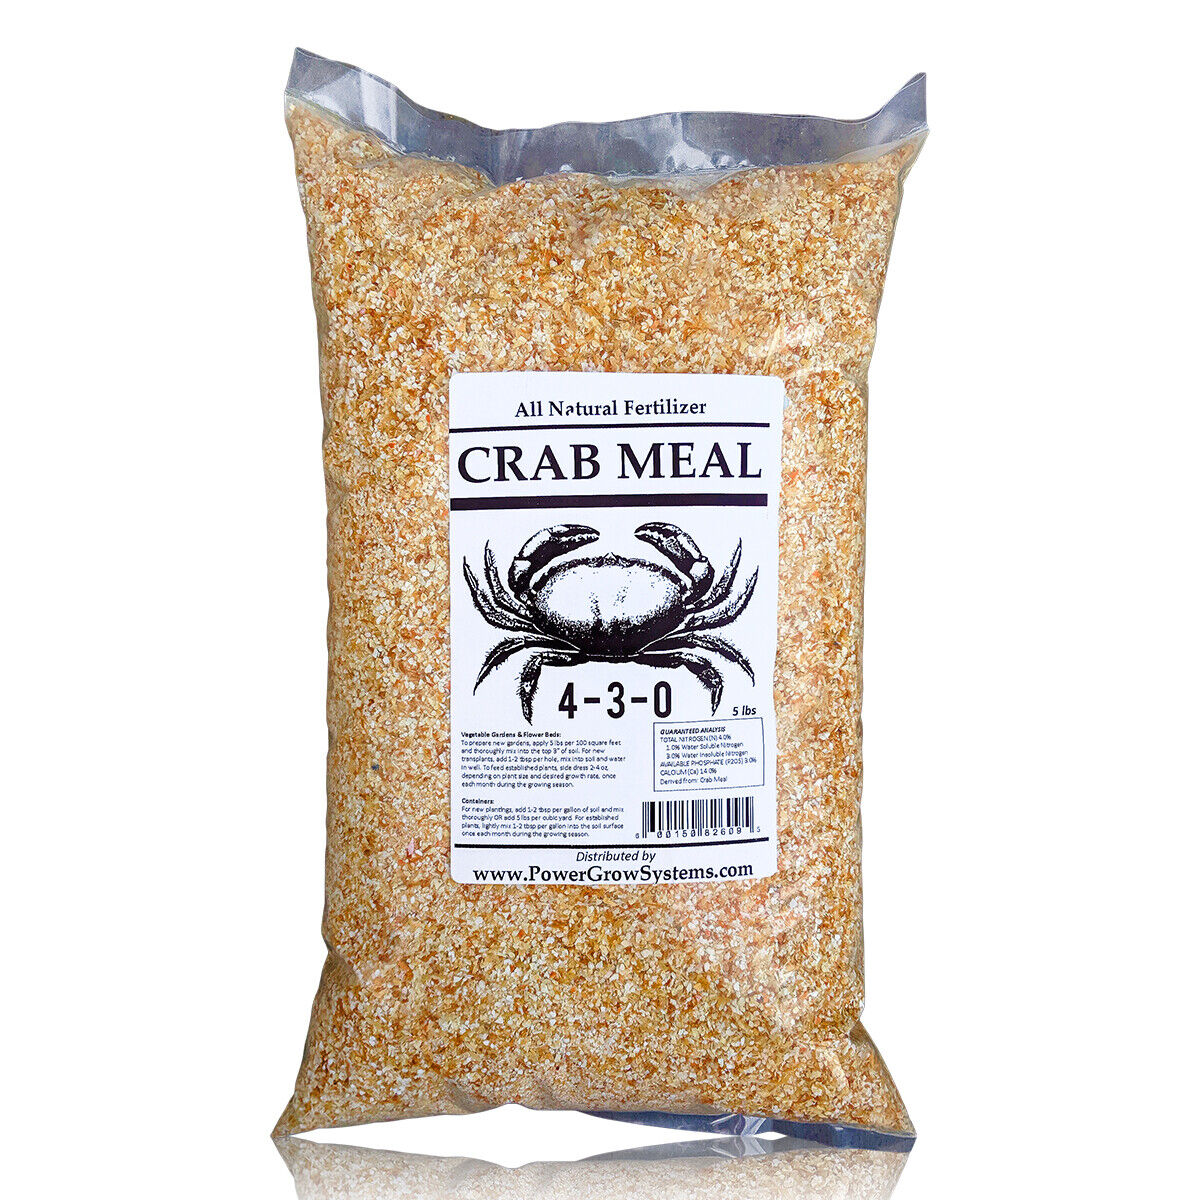 Crab Meal - Organic Crab Meal Fertilizer (Crab Shell) in BULK (5 pounds)